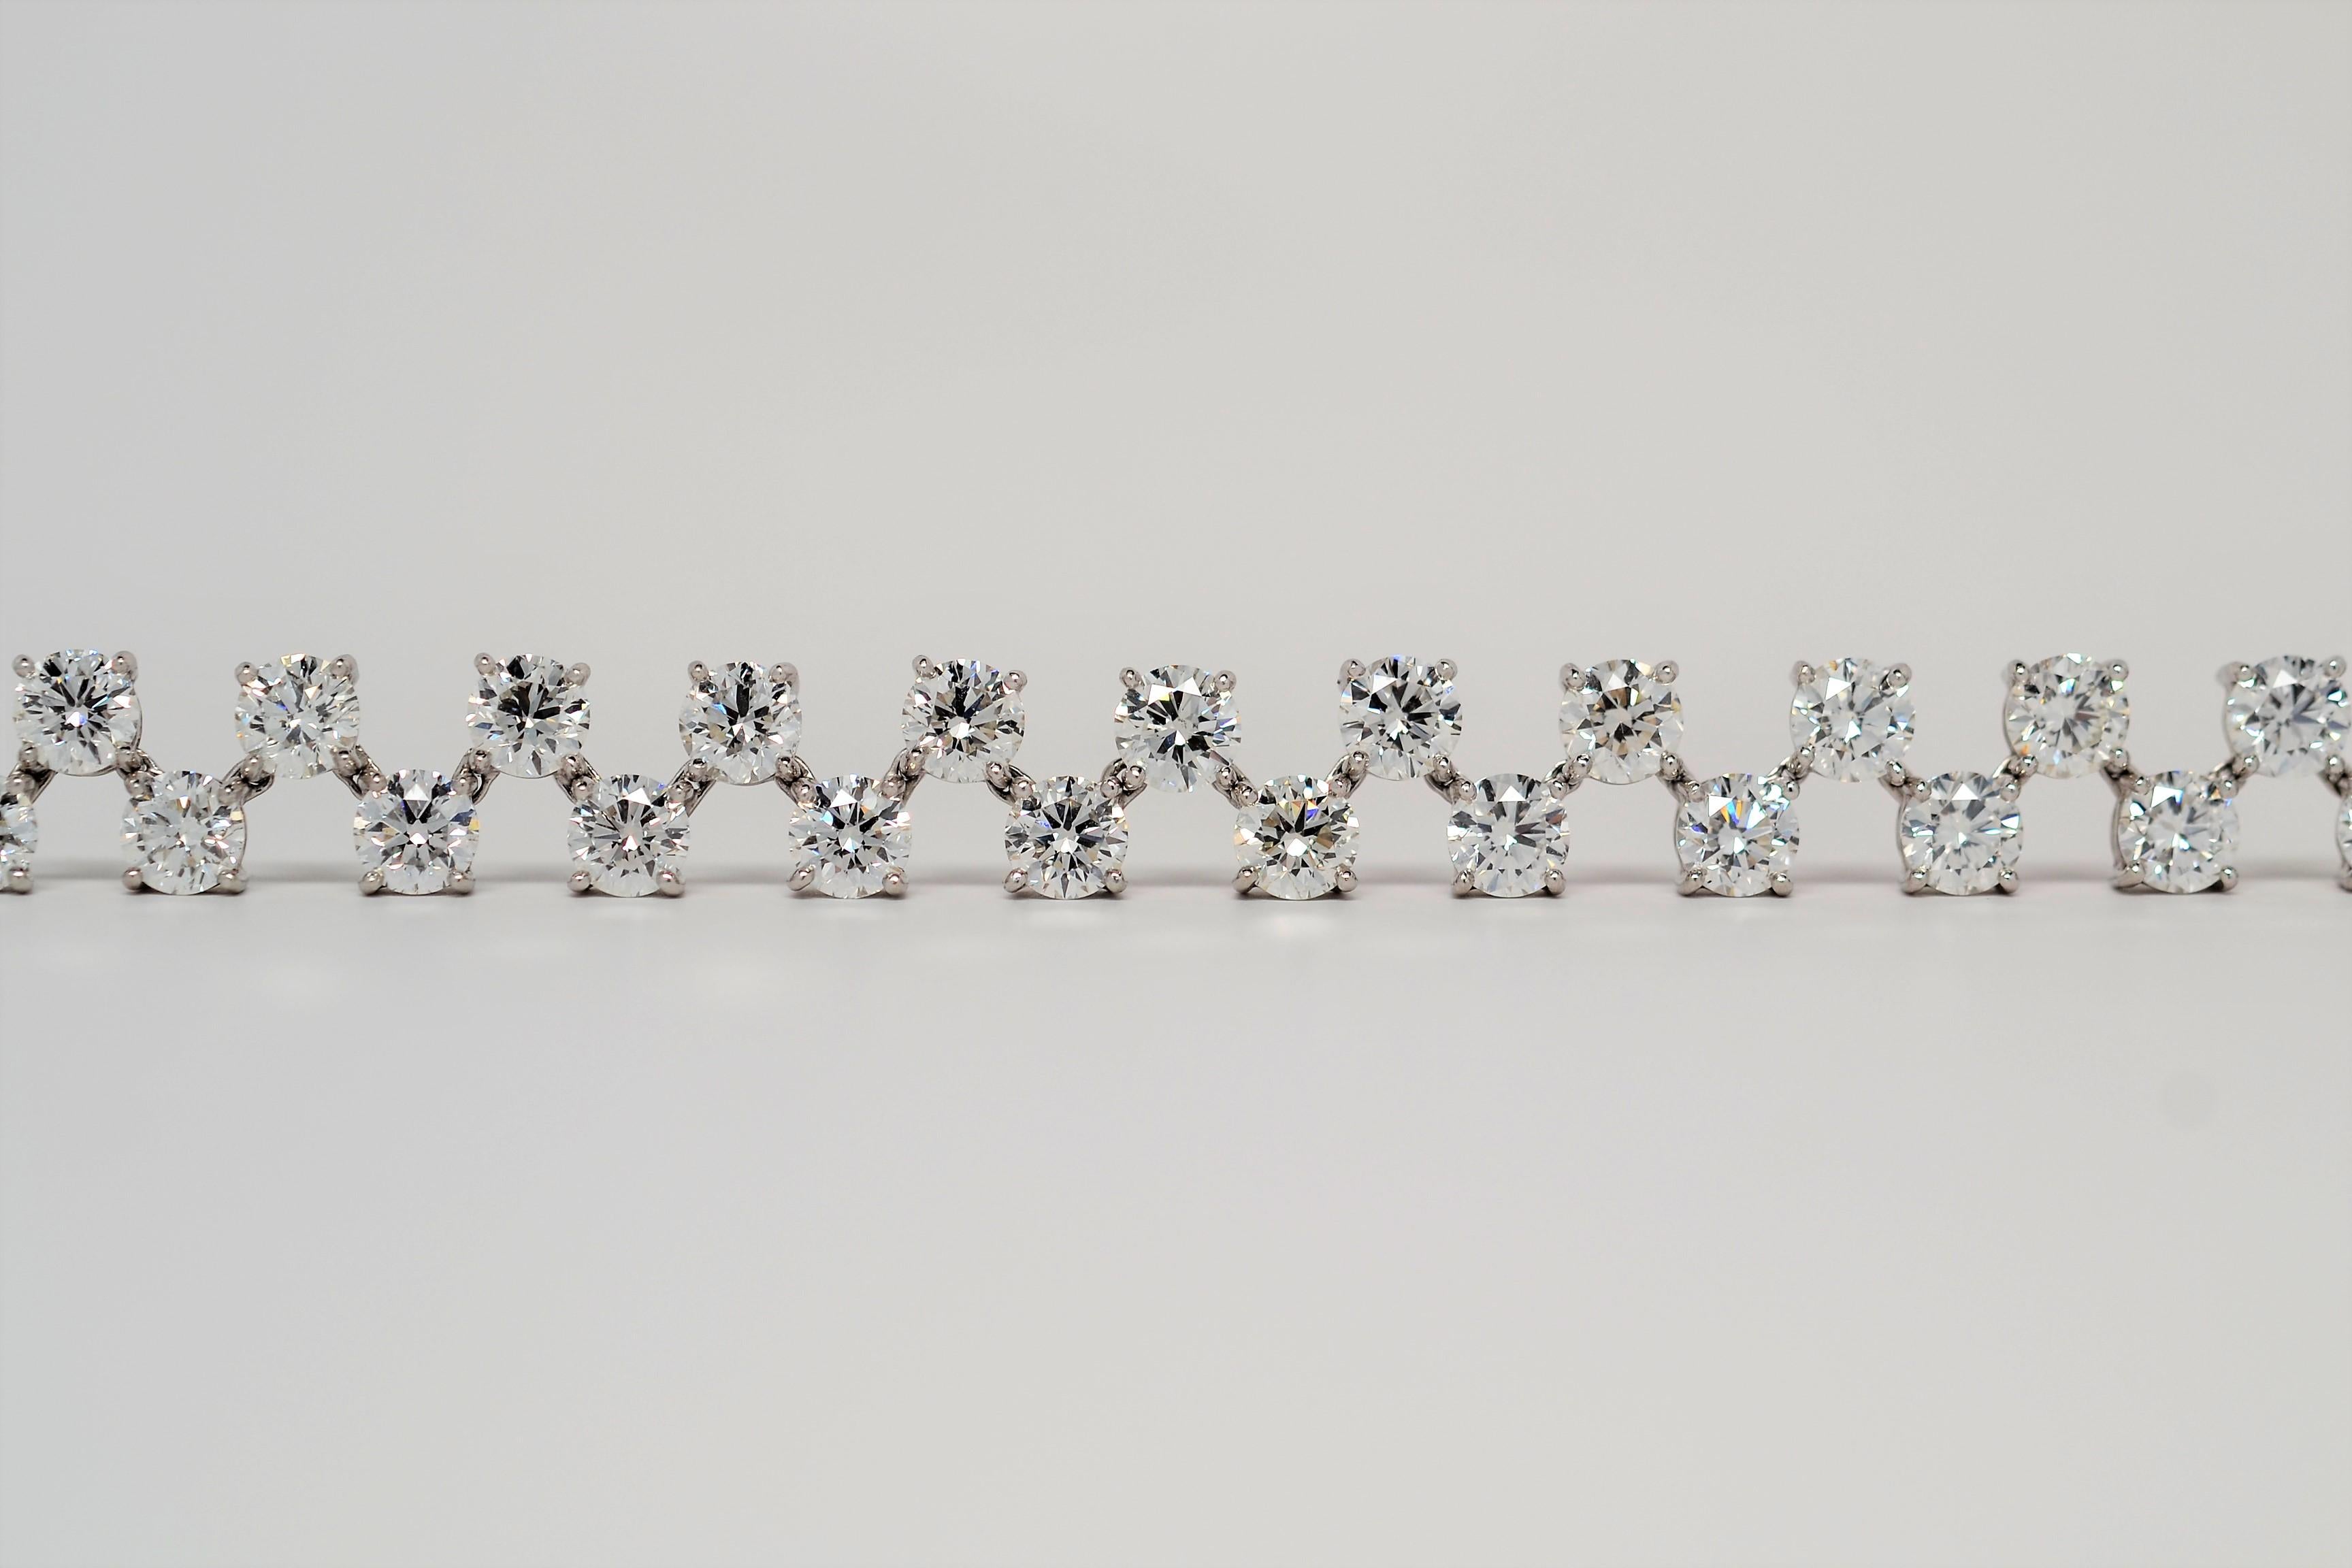 A fun and vibrant ladies' bracelet, set in Platinum with Round Brilliant Cut Diamonds. The bracelet is a Zig-Zag pattern of offset Round Brilliant Cut Diamonds with a two row layout. Each diamond is set in handmade Platinum basket with four prongs.